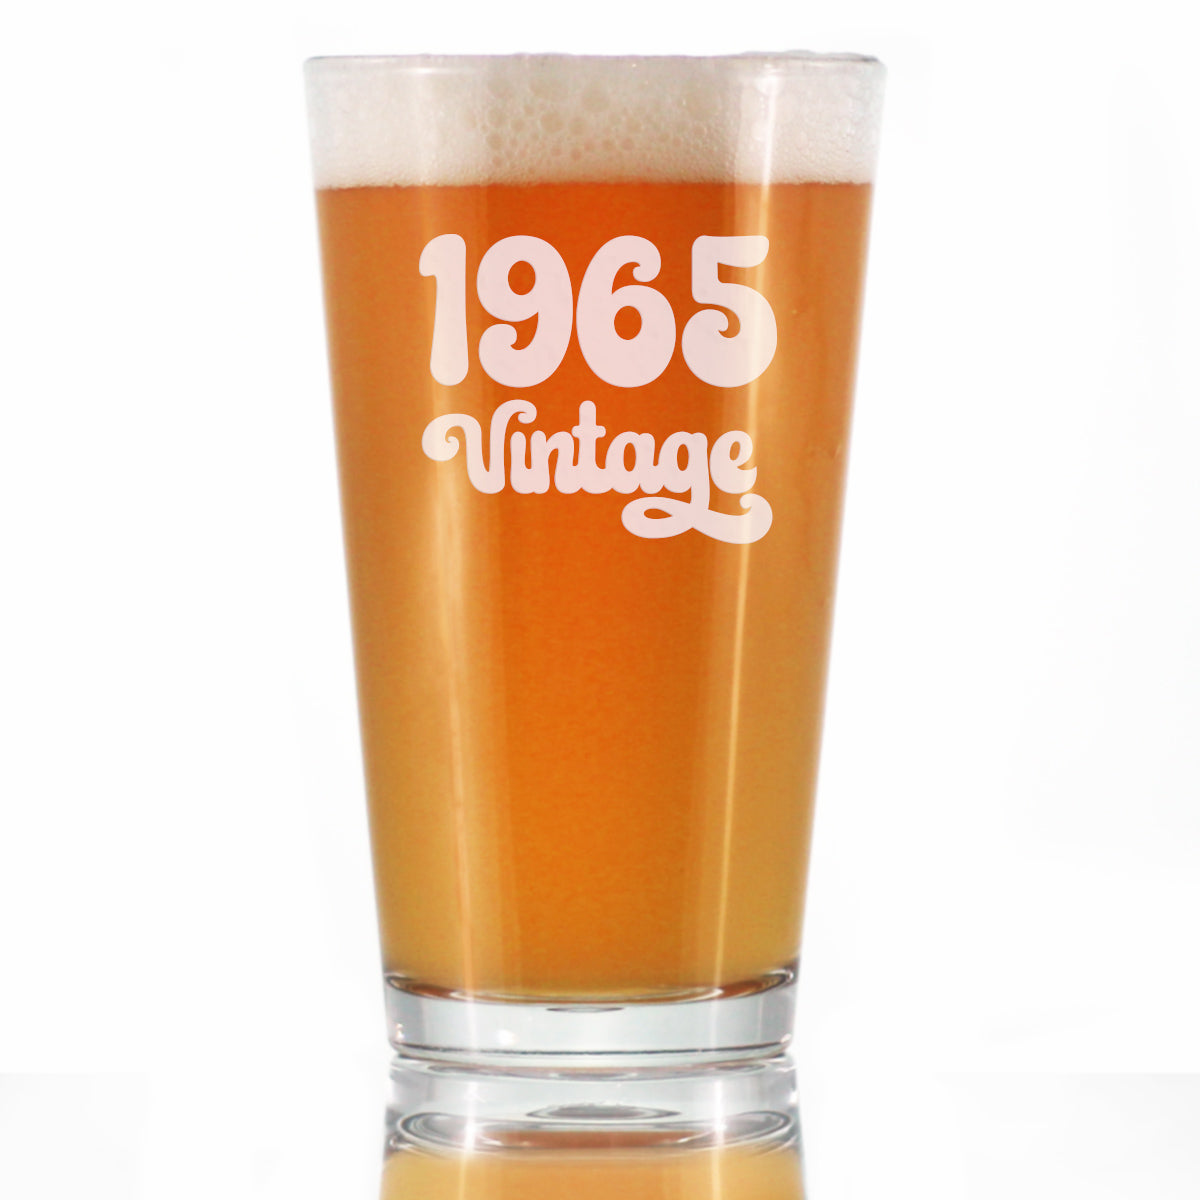 Vintage 1965 - Pint Glass for Beer - 59th Birthday Gifts for Men or Women Turning 59 - Fun Bday Party Decor - 16 oz